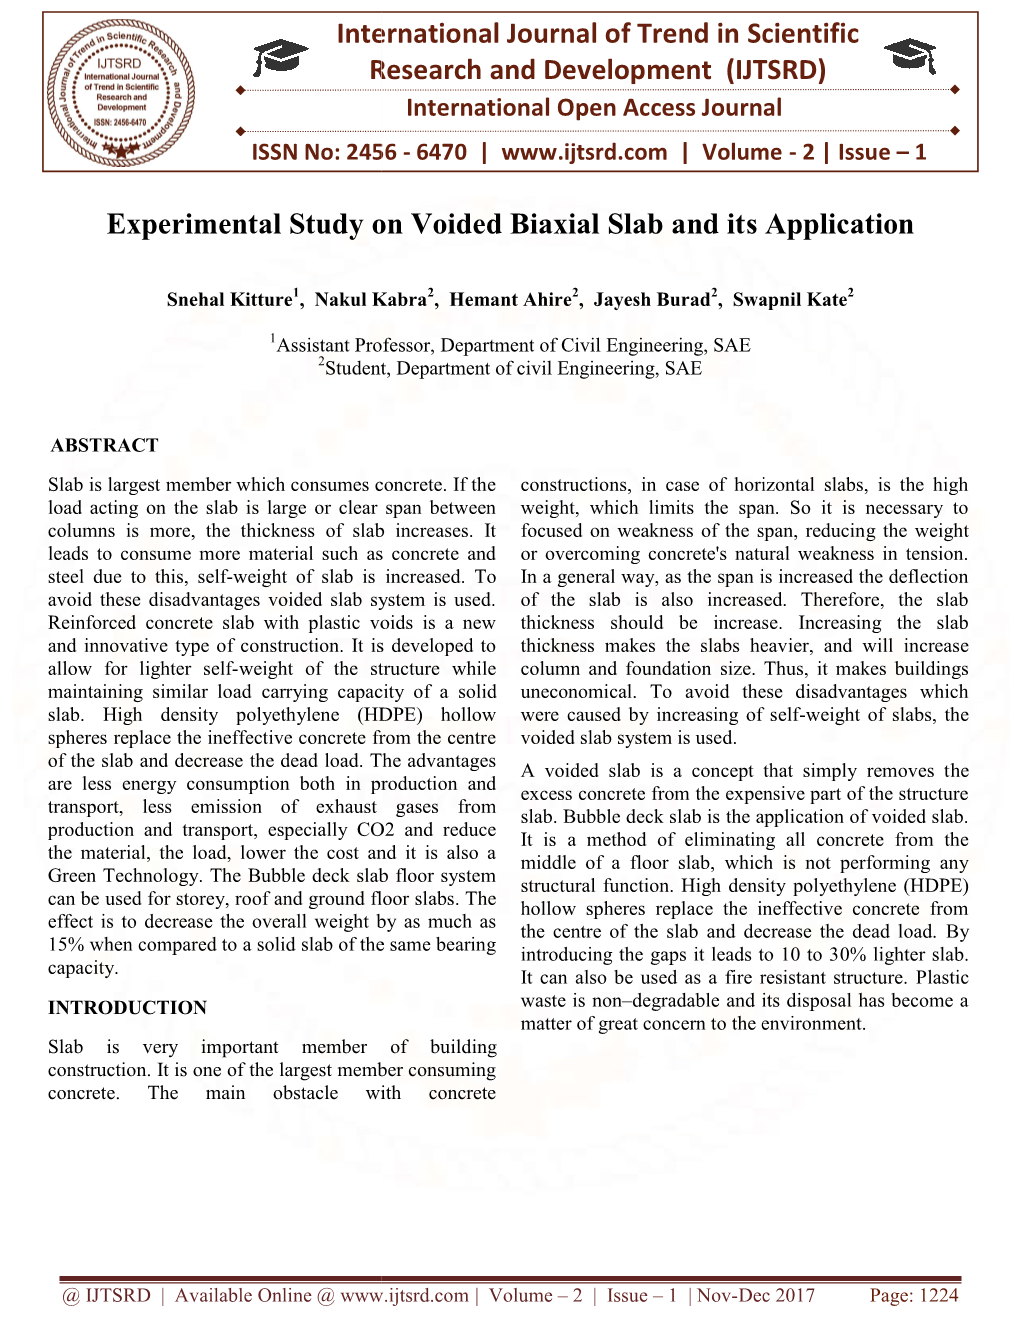 International Research Experimental Study on Voided Bi International Journal of Trend in Scientific Research and Development (I